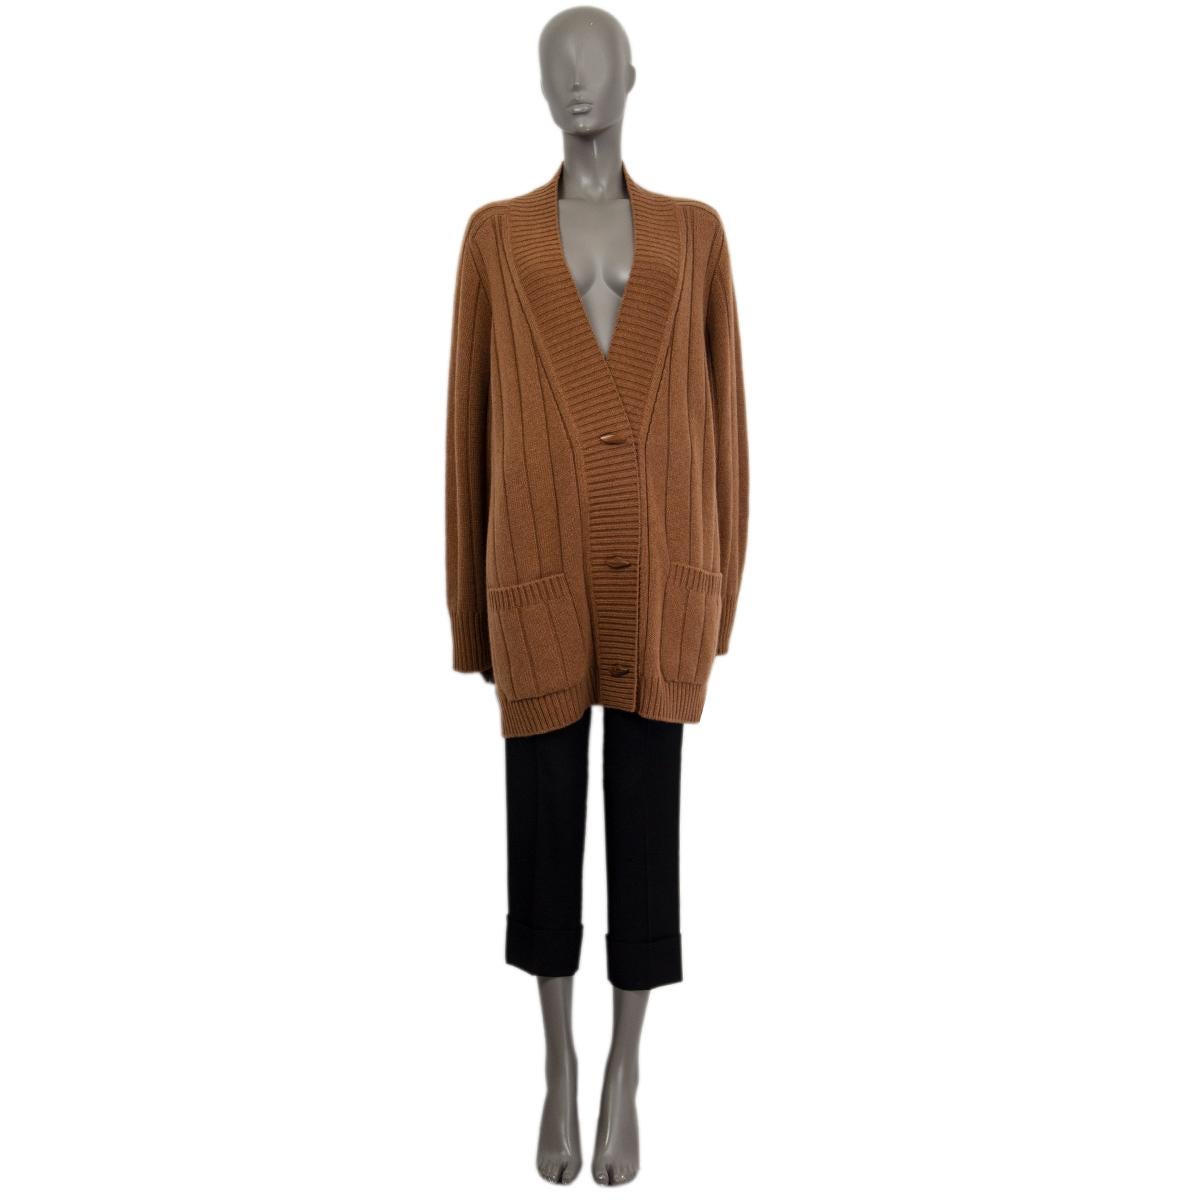 100% authentic Loro Piana 2021 'Duca D'Aosta' cardigan in Gingerbread (camel brown) baby cashmere (100%). Features long raglan sleeves (sleeve measurements taken from the neck) and two patch pockets on the front. Opens with three brown wood toggles